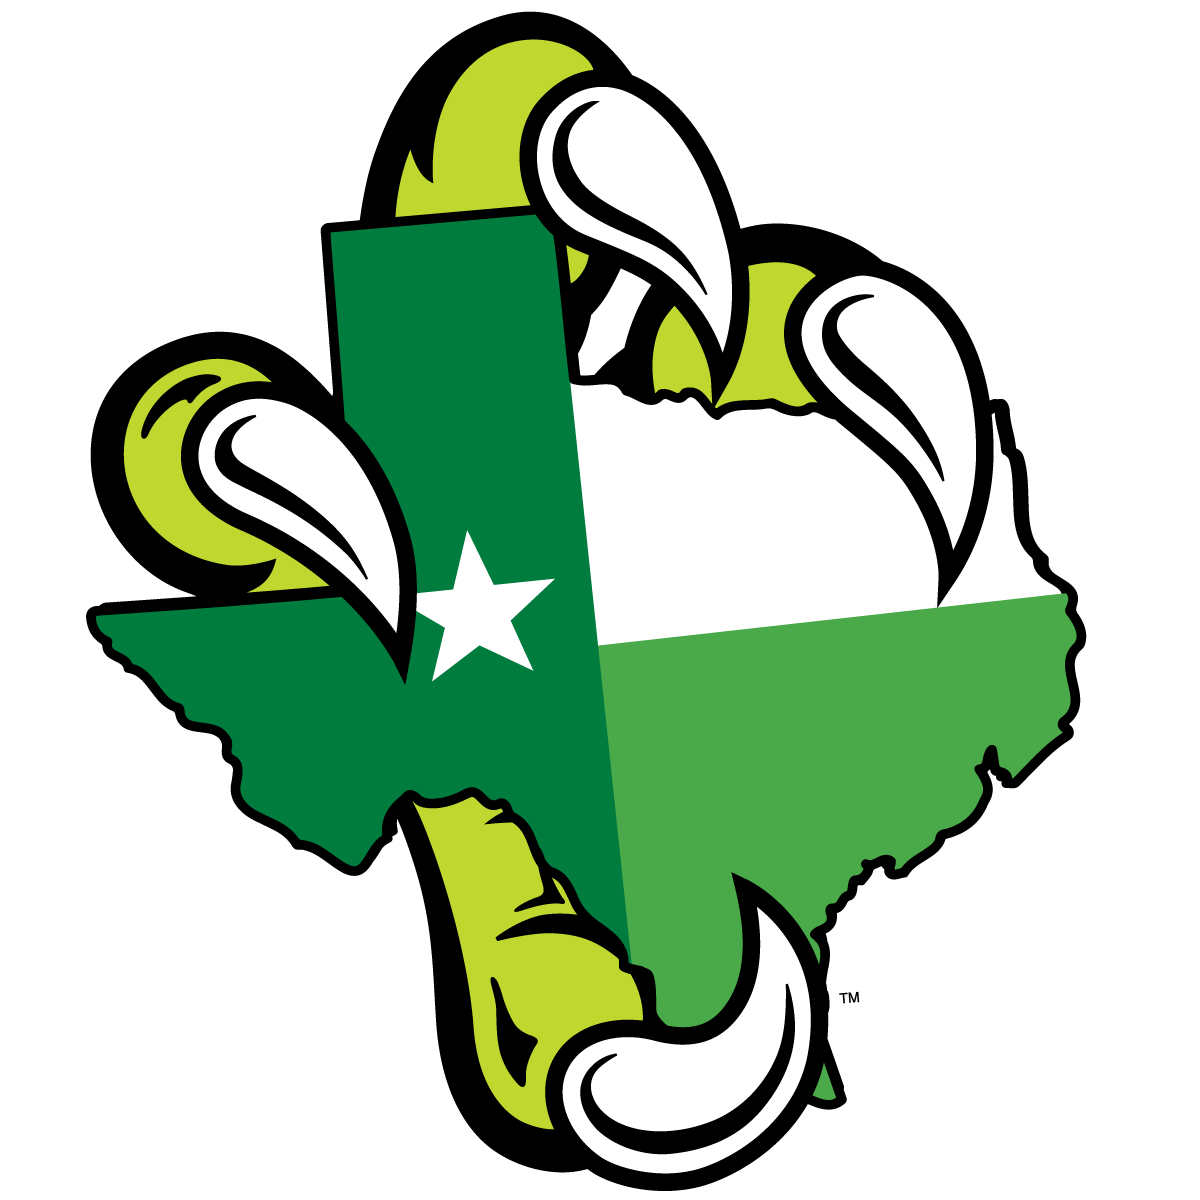 A chartreuse eagle claw holding the UNT battle flag in the shape of Texas